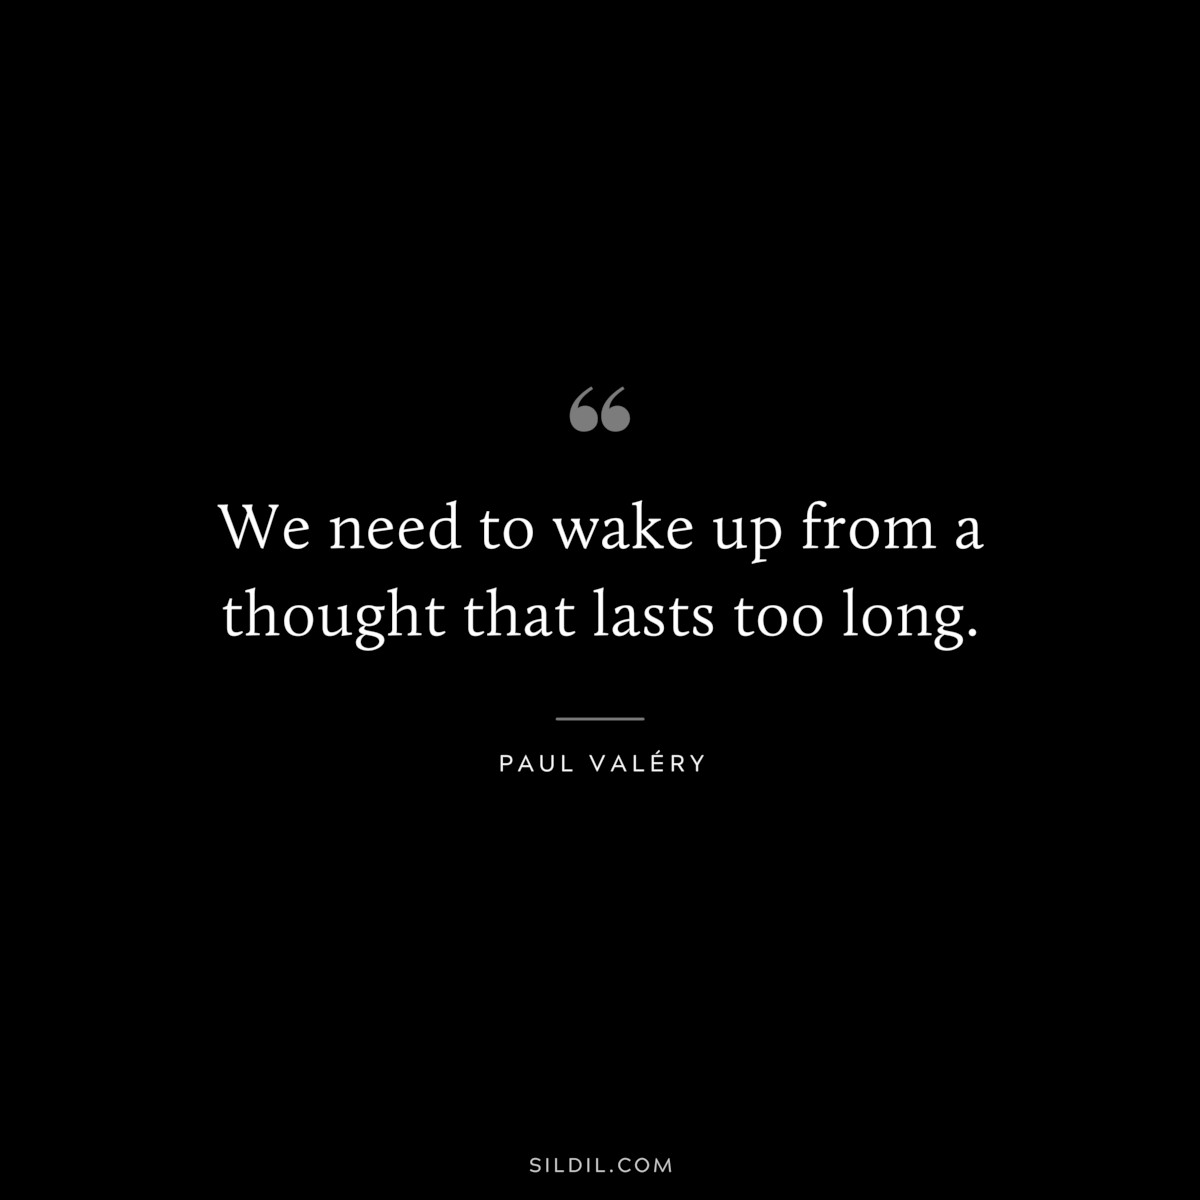 We need to wake up from a thought that lasts too long. ― Paul Valéry